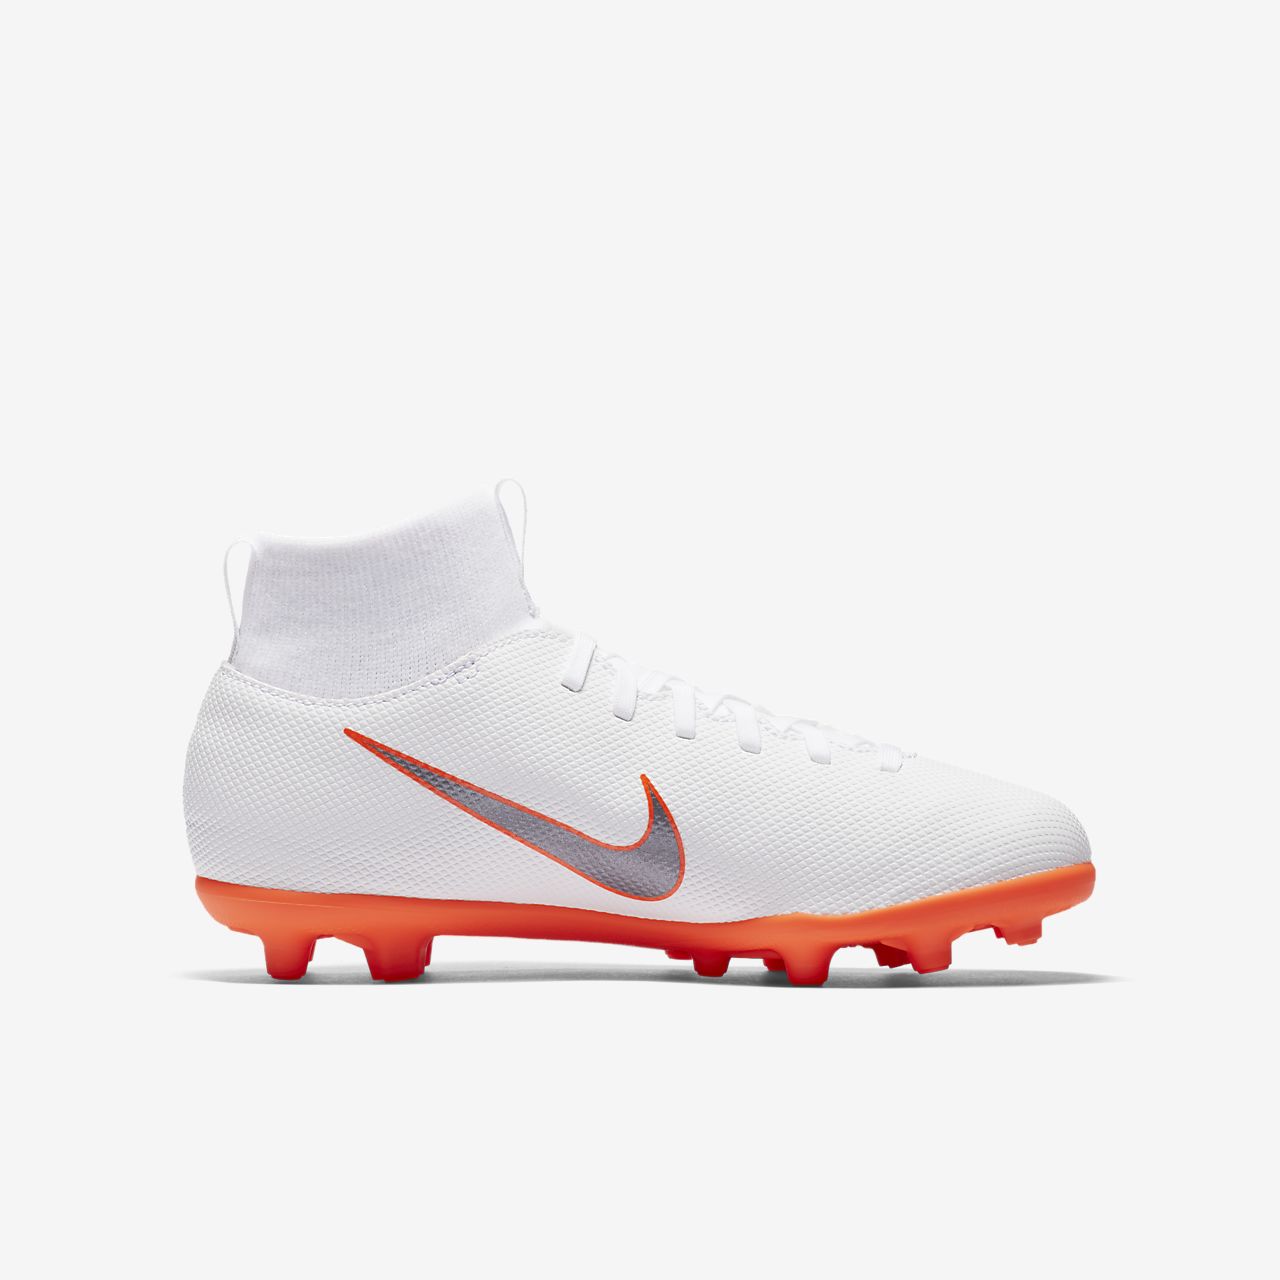  Nike Superfly 7 Club Fgmg parallel input.Amazon